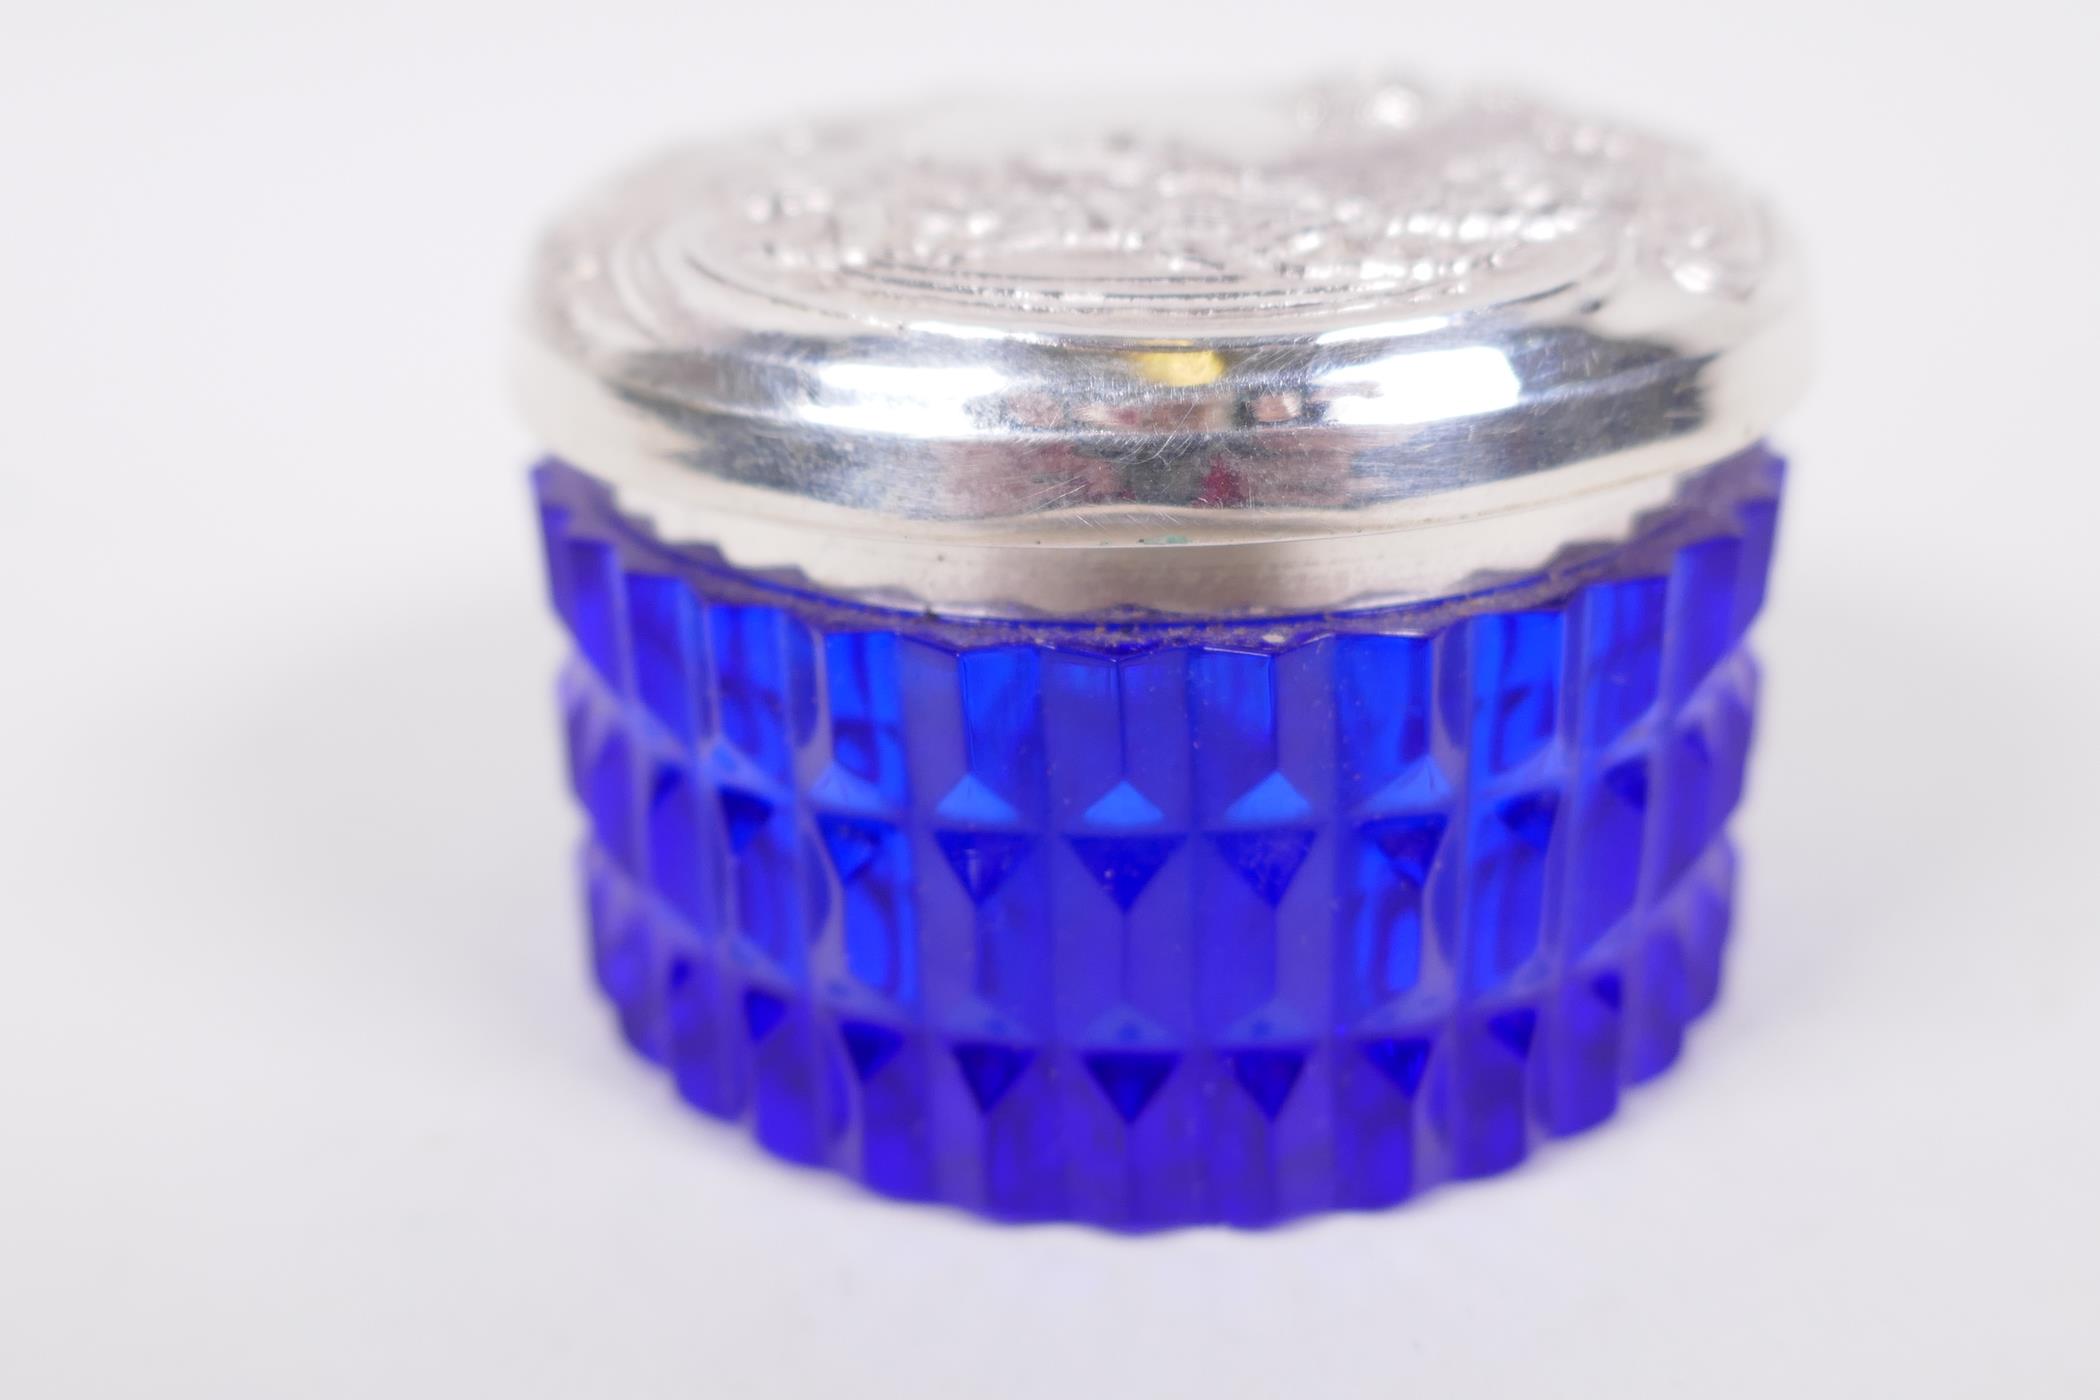 A circular sterling silver lidded blue glass trinket box, the lid embossed in the Art Nouveau style, - Image 3 of 3